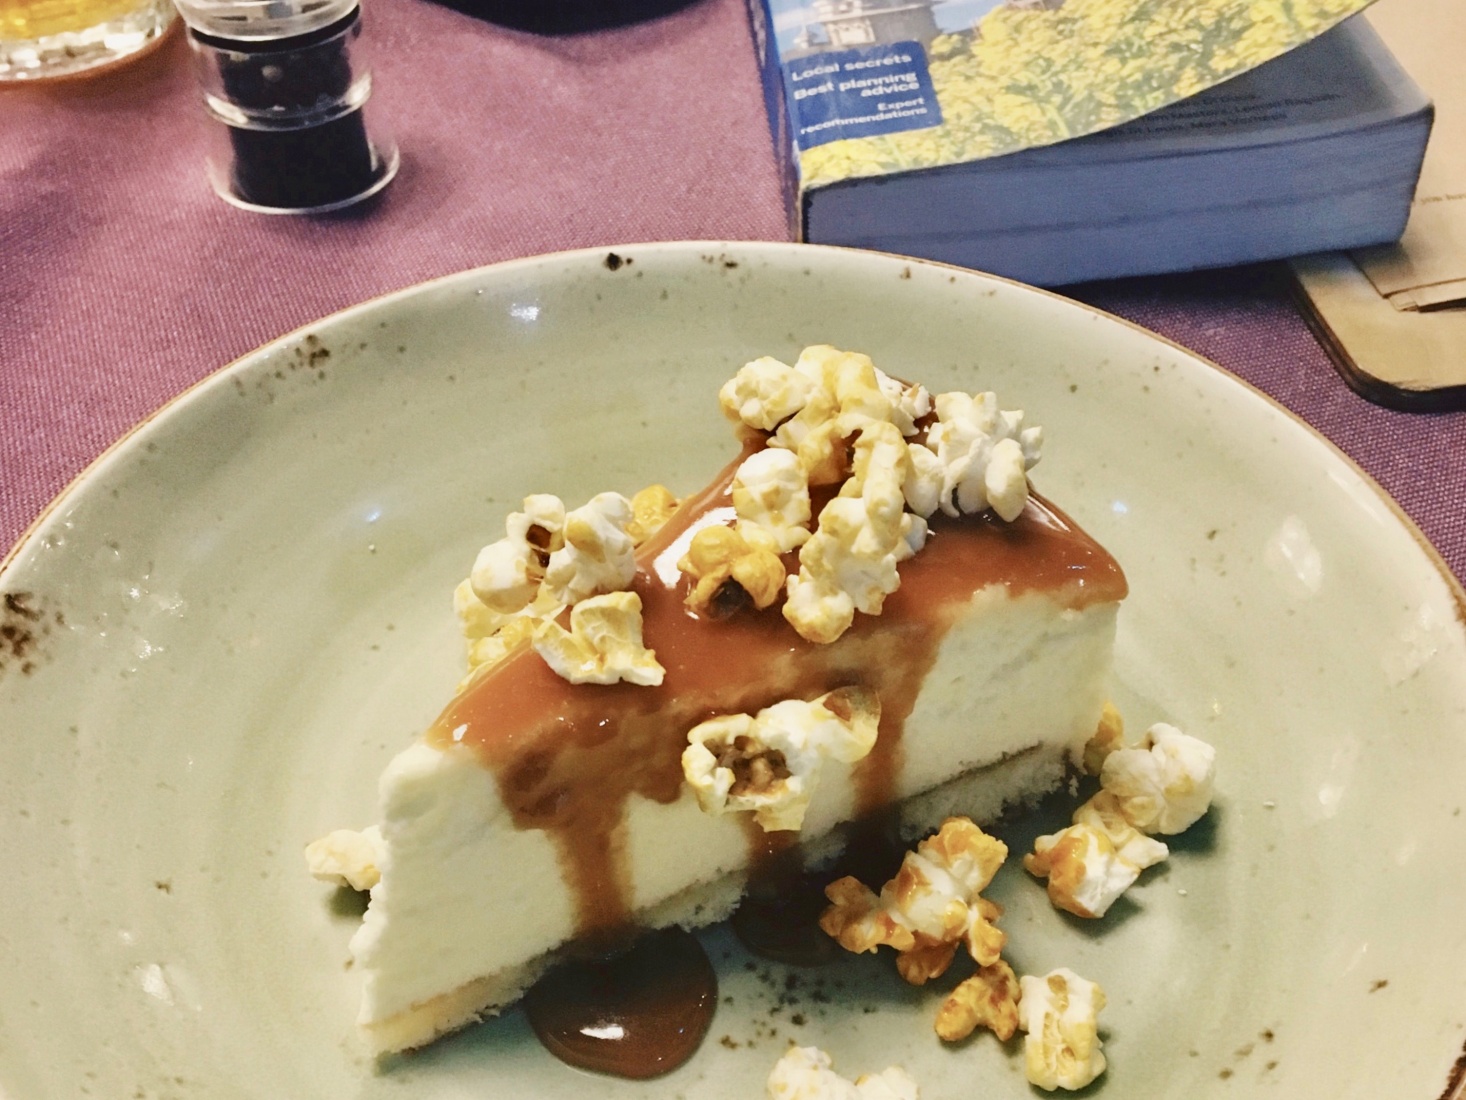 Popcorn topped cheesecake in Astrakhan, Russia, showing variety of desserts and cultural delicacies available through travel.